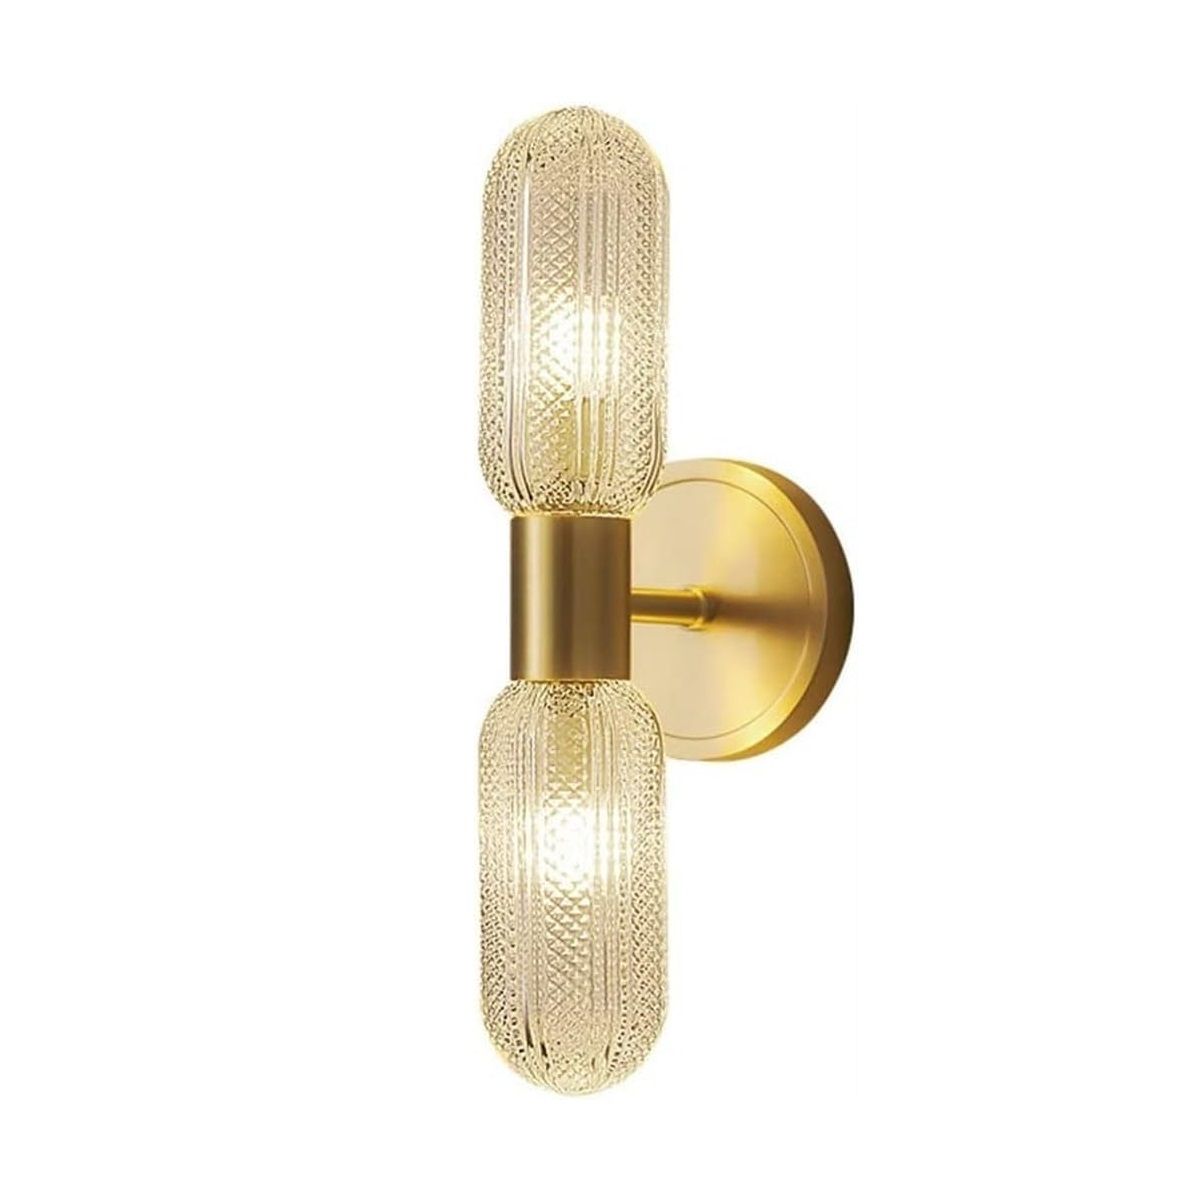 Wall lamp (Sconce) CARTY by Romatti